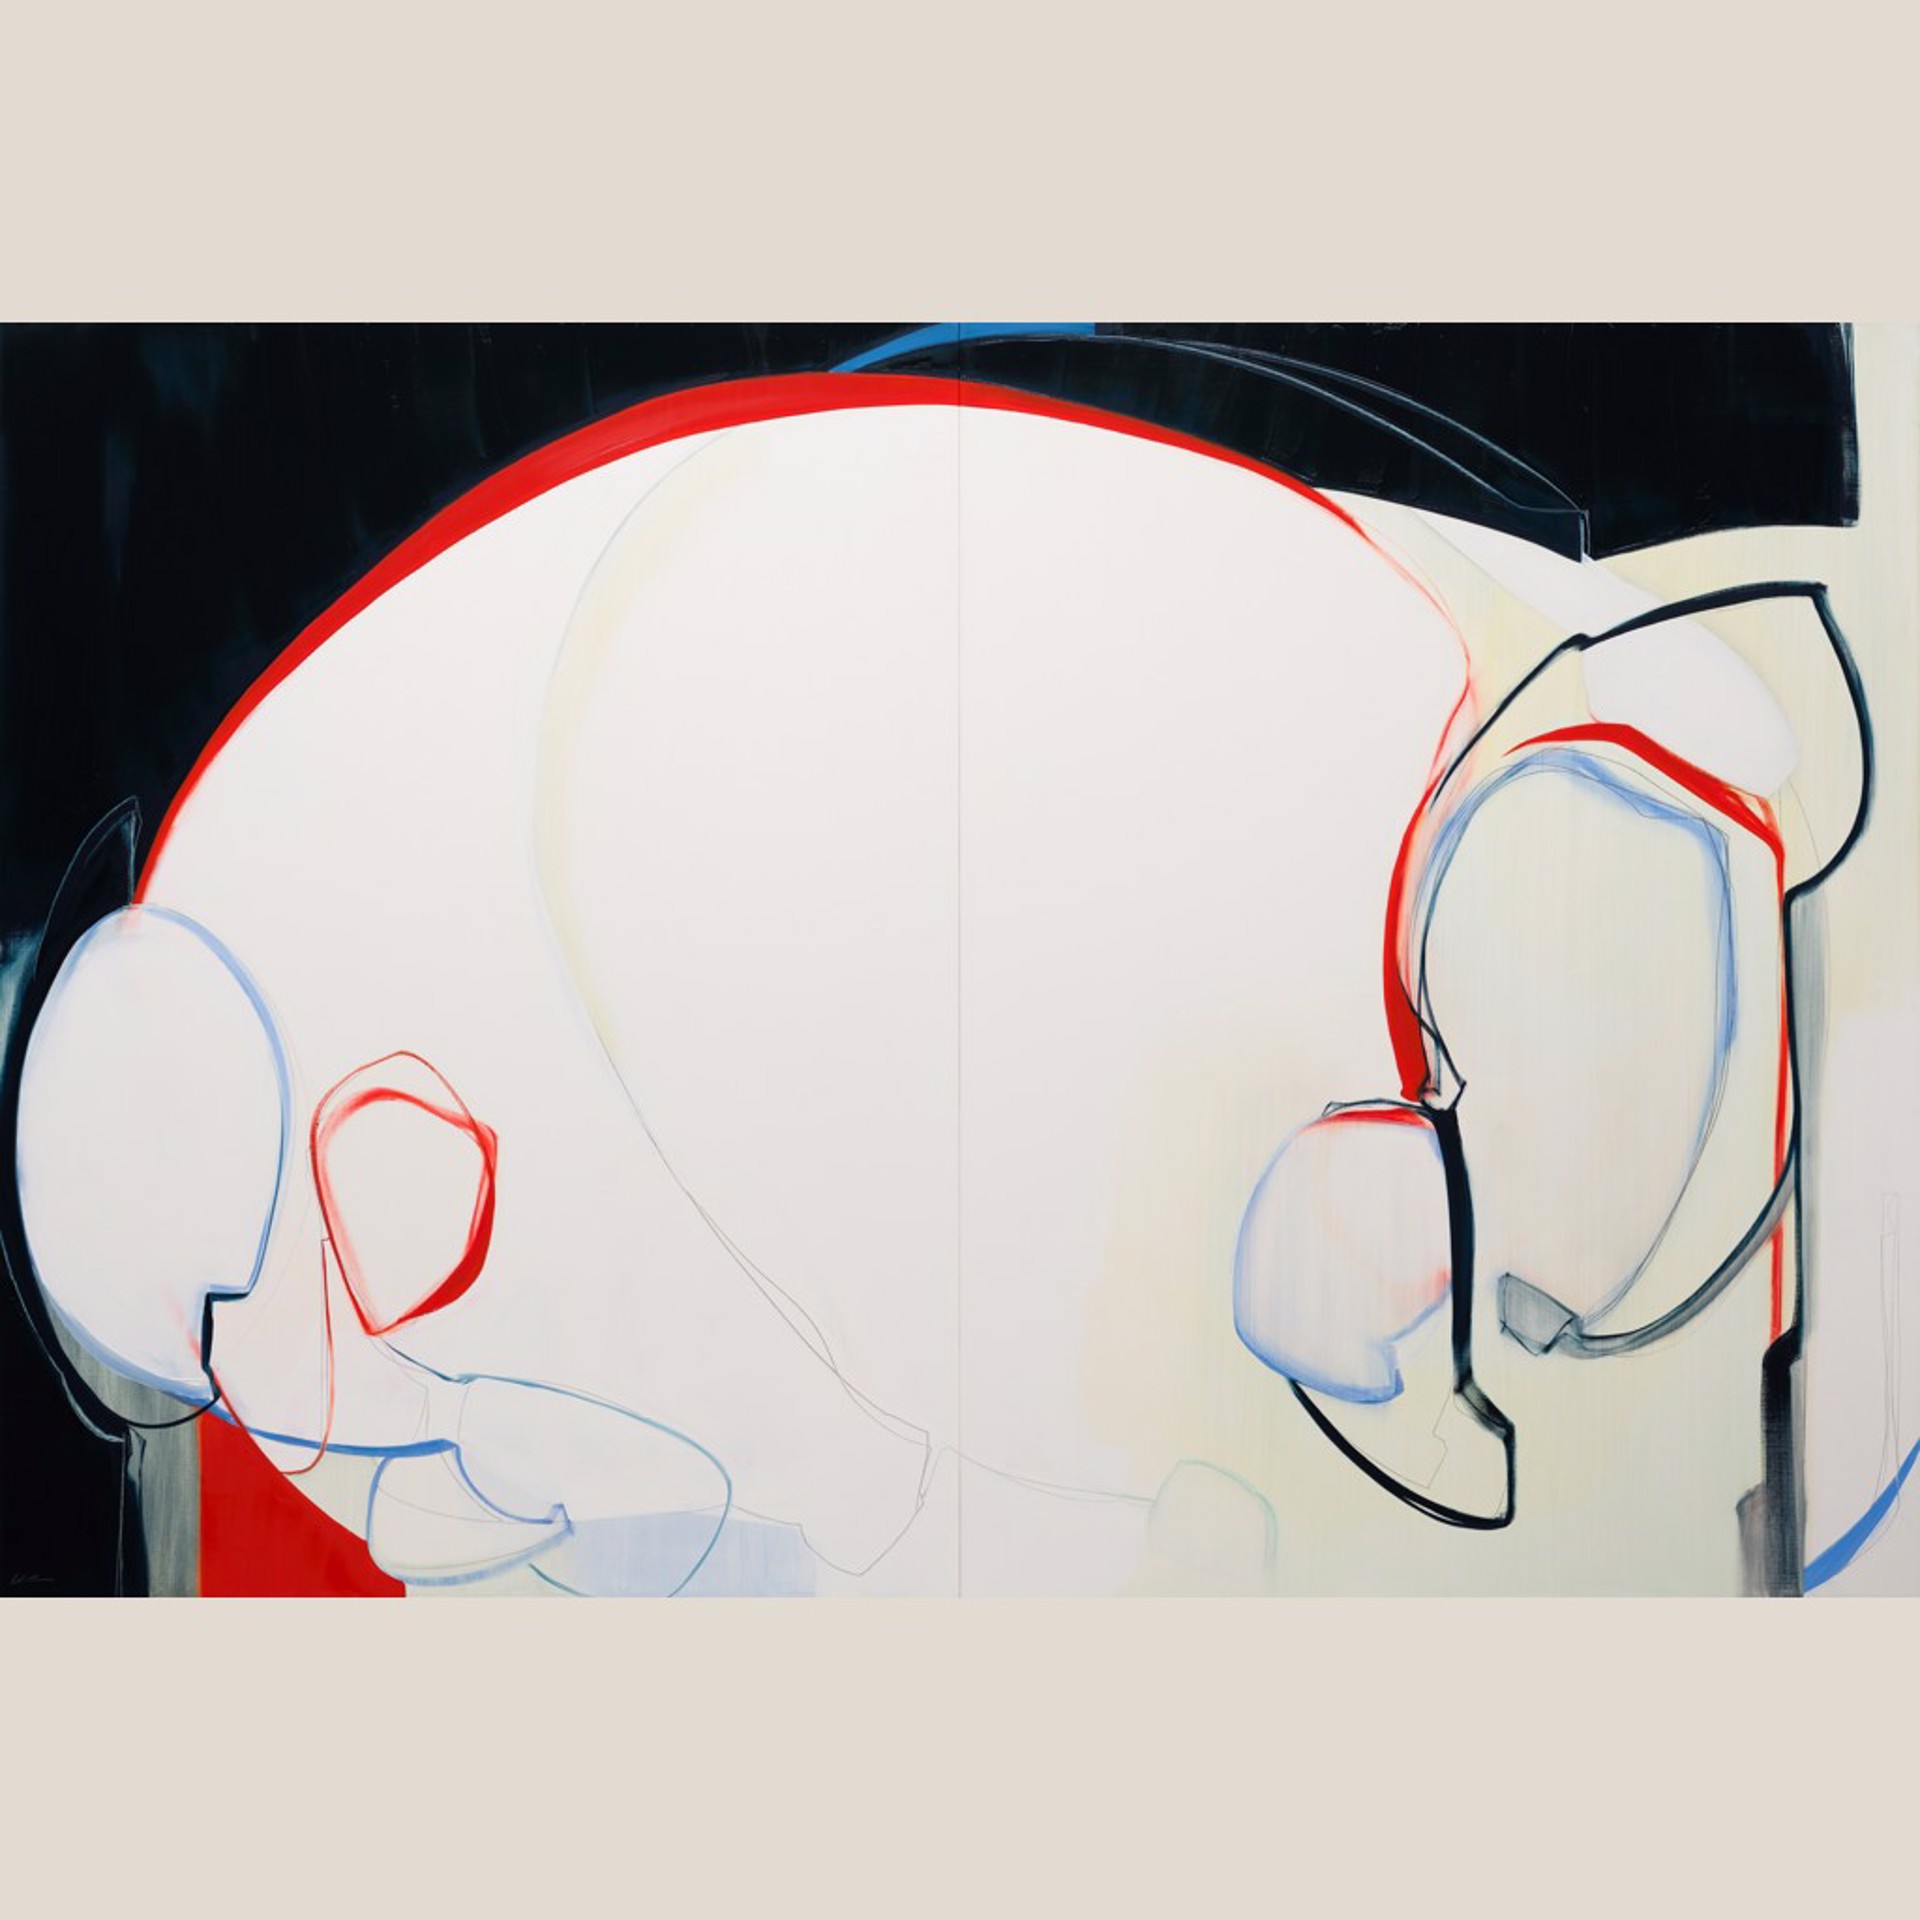 RED INCLUSION (DIPTYCH) by ROSE UMERLIK